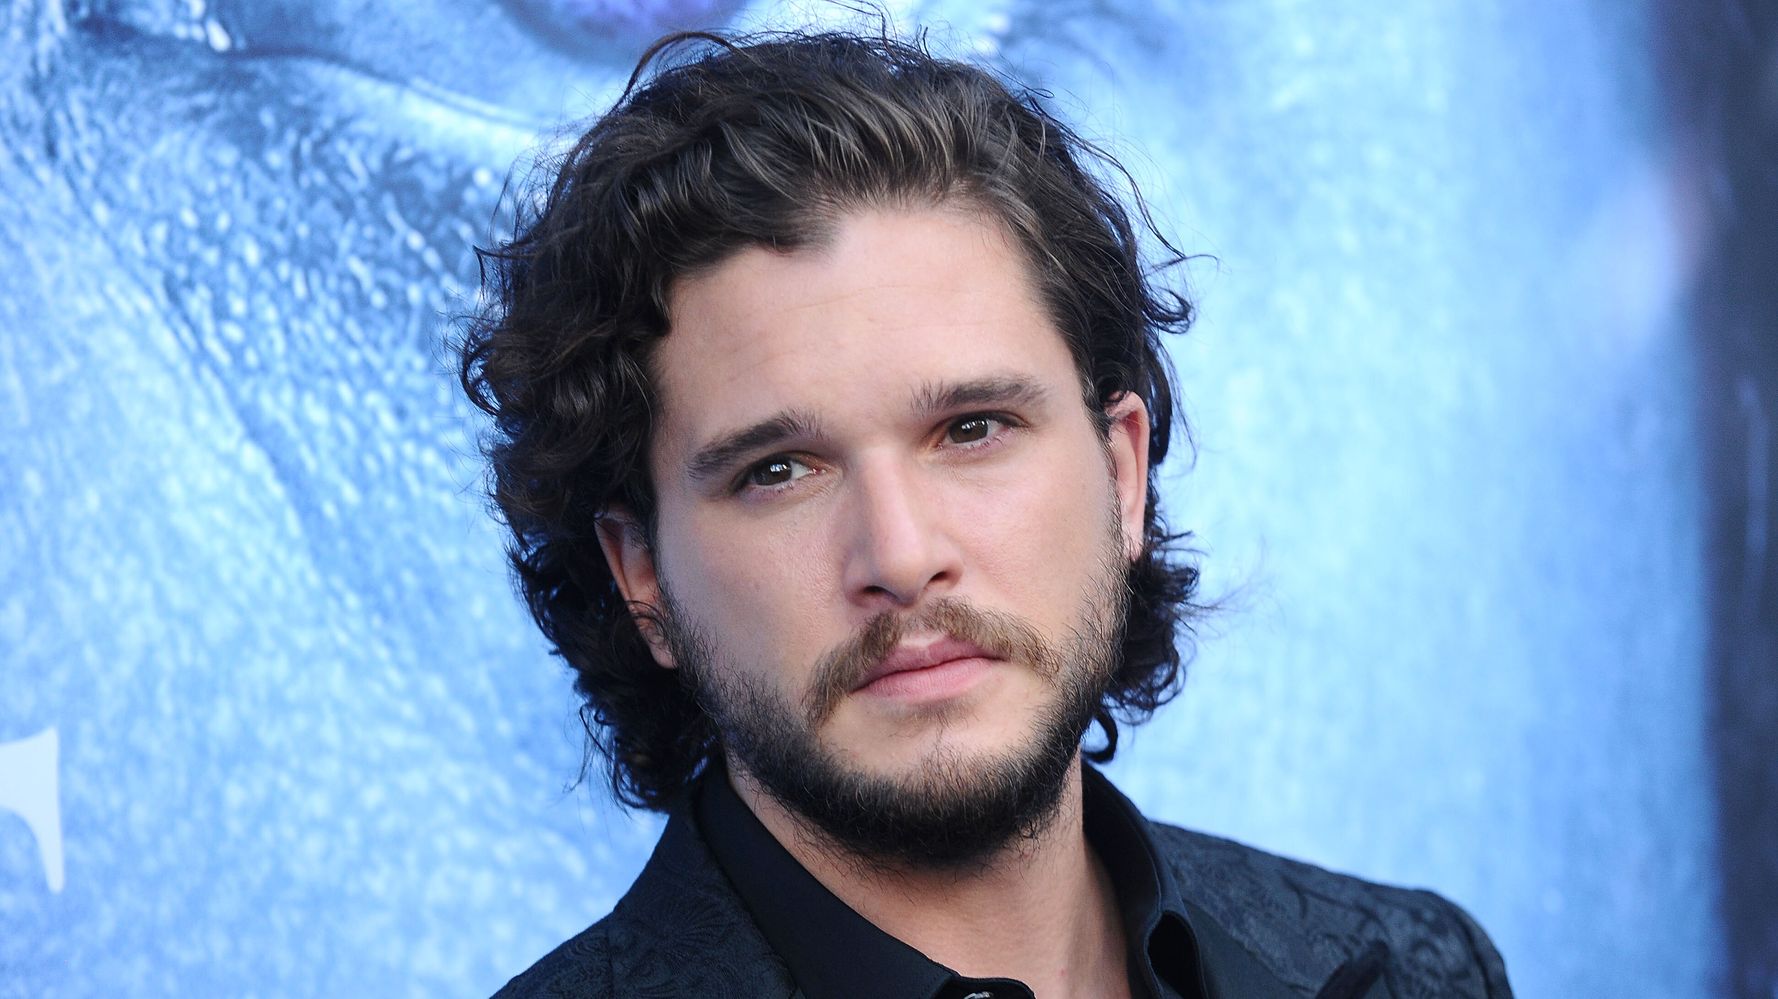 Kit Harington Reveals 'The Most Beautiful Thing' That Helped Him With Sobriety